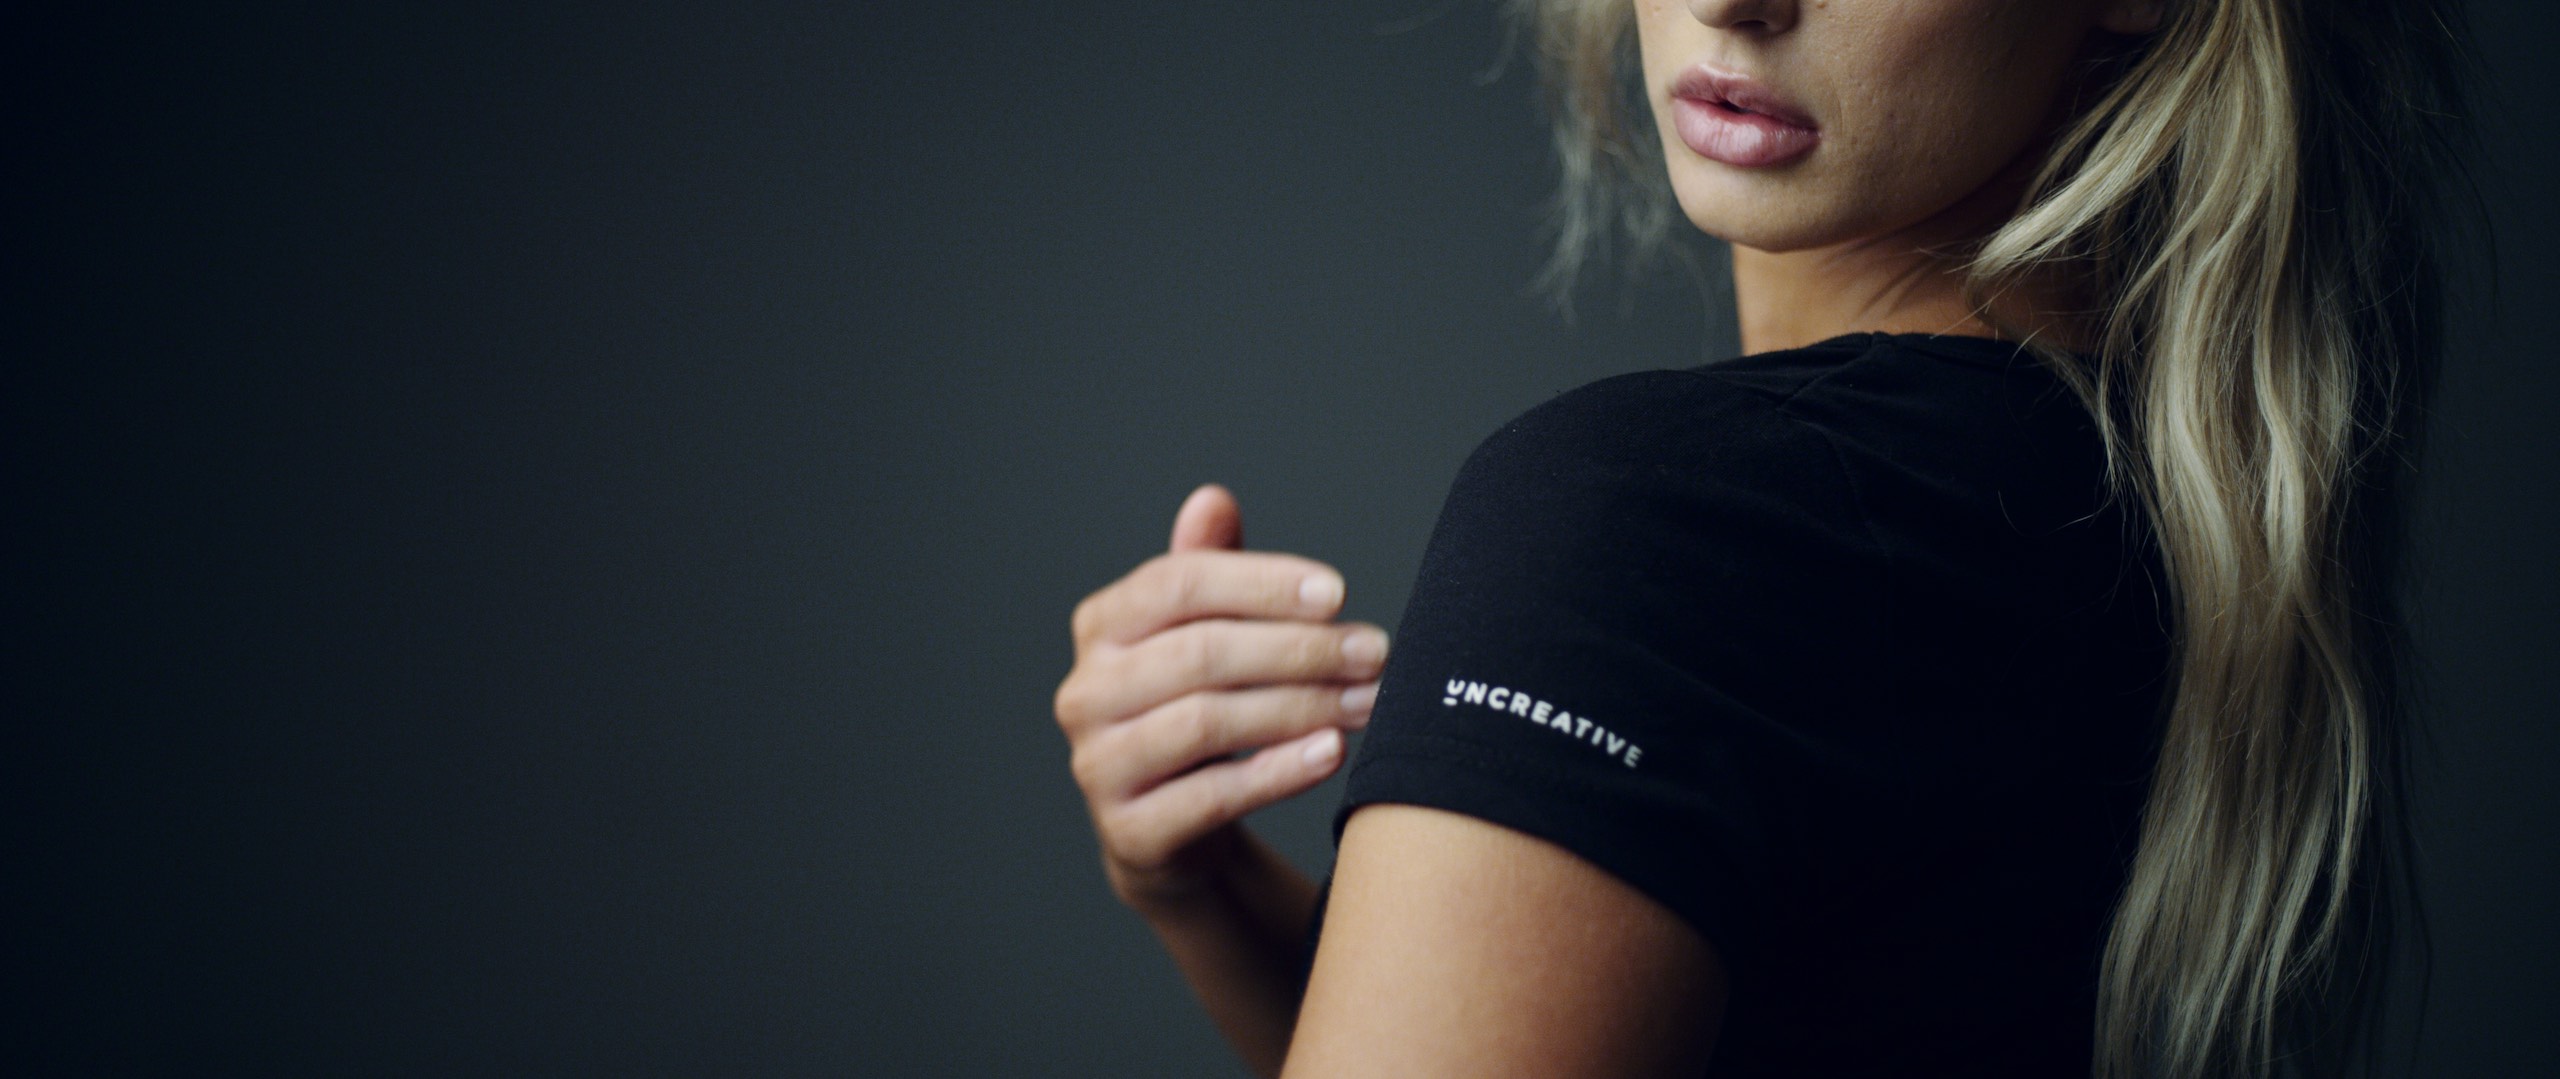 The Dailies Episode 4 The Making of Uncreative Merchandise Shop Side profile of woman with long blond hair looking over her shoulder wearing a black Uncreative t shirt showing the Uncreative logo posing for the camera